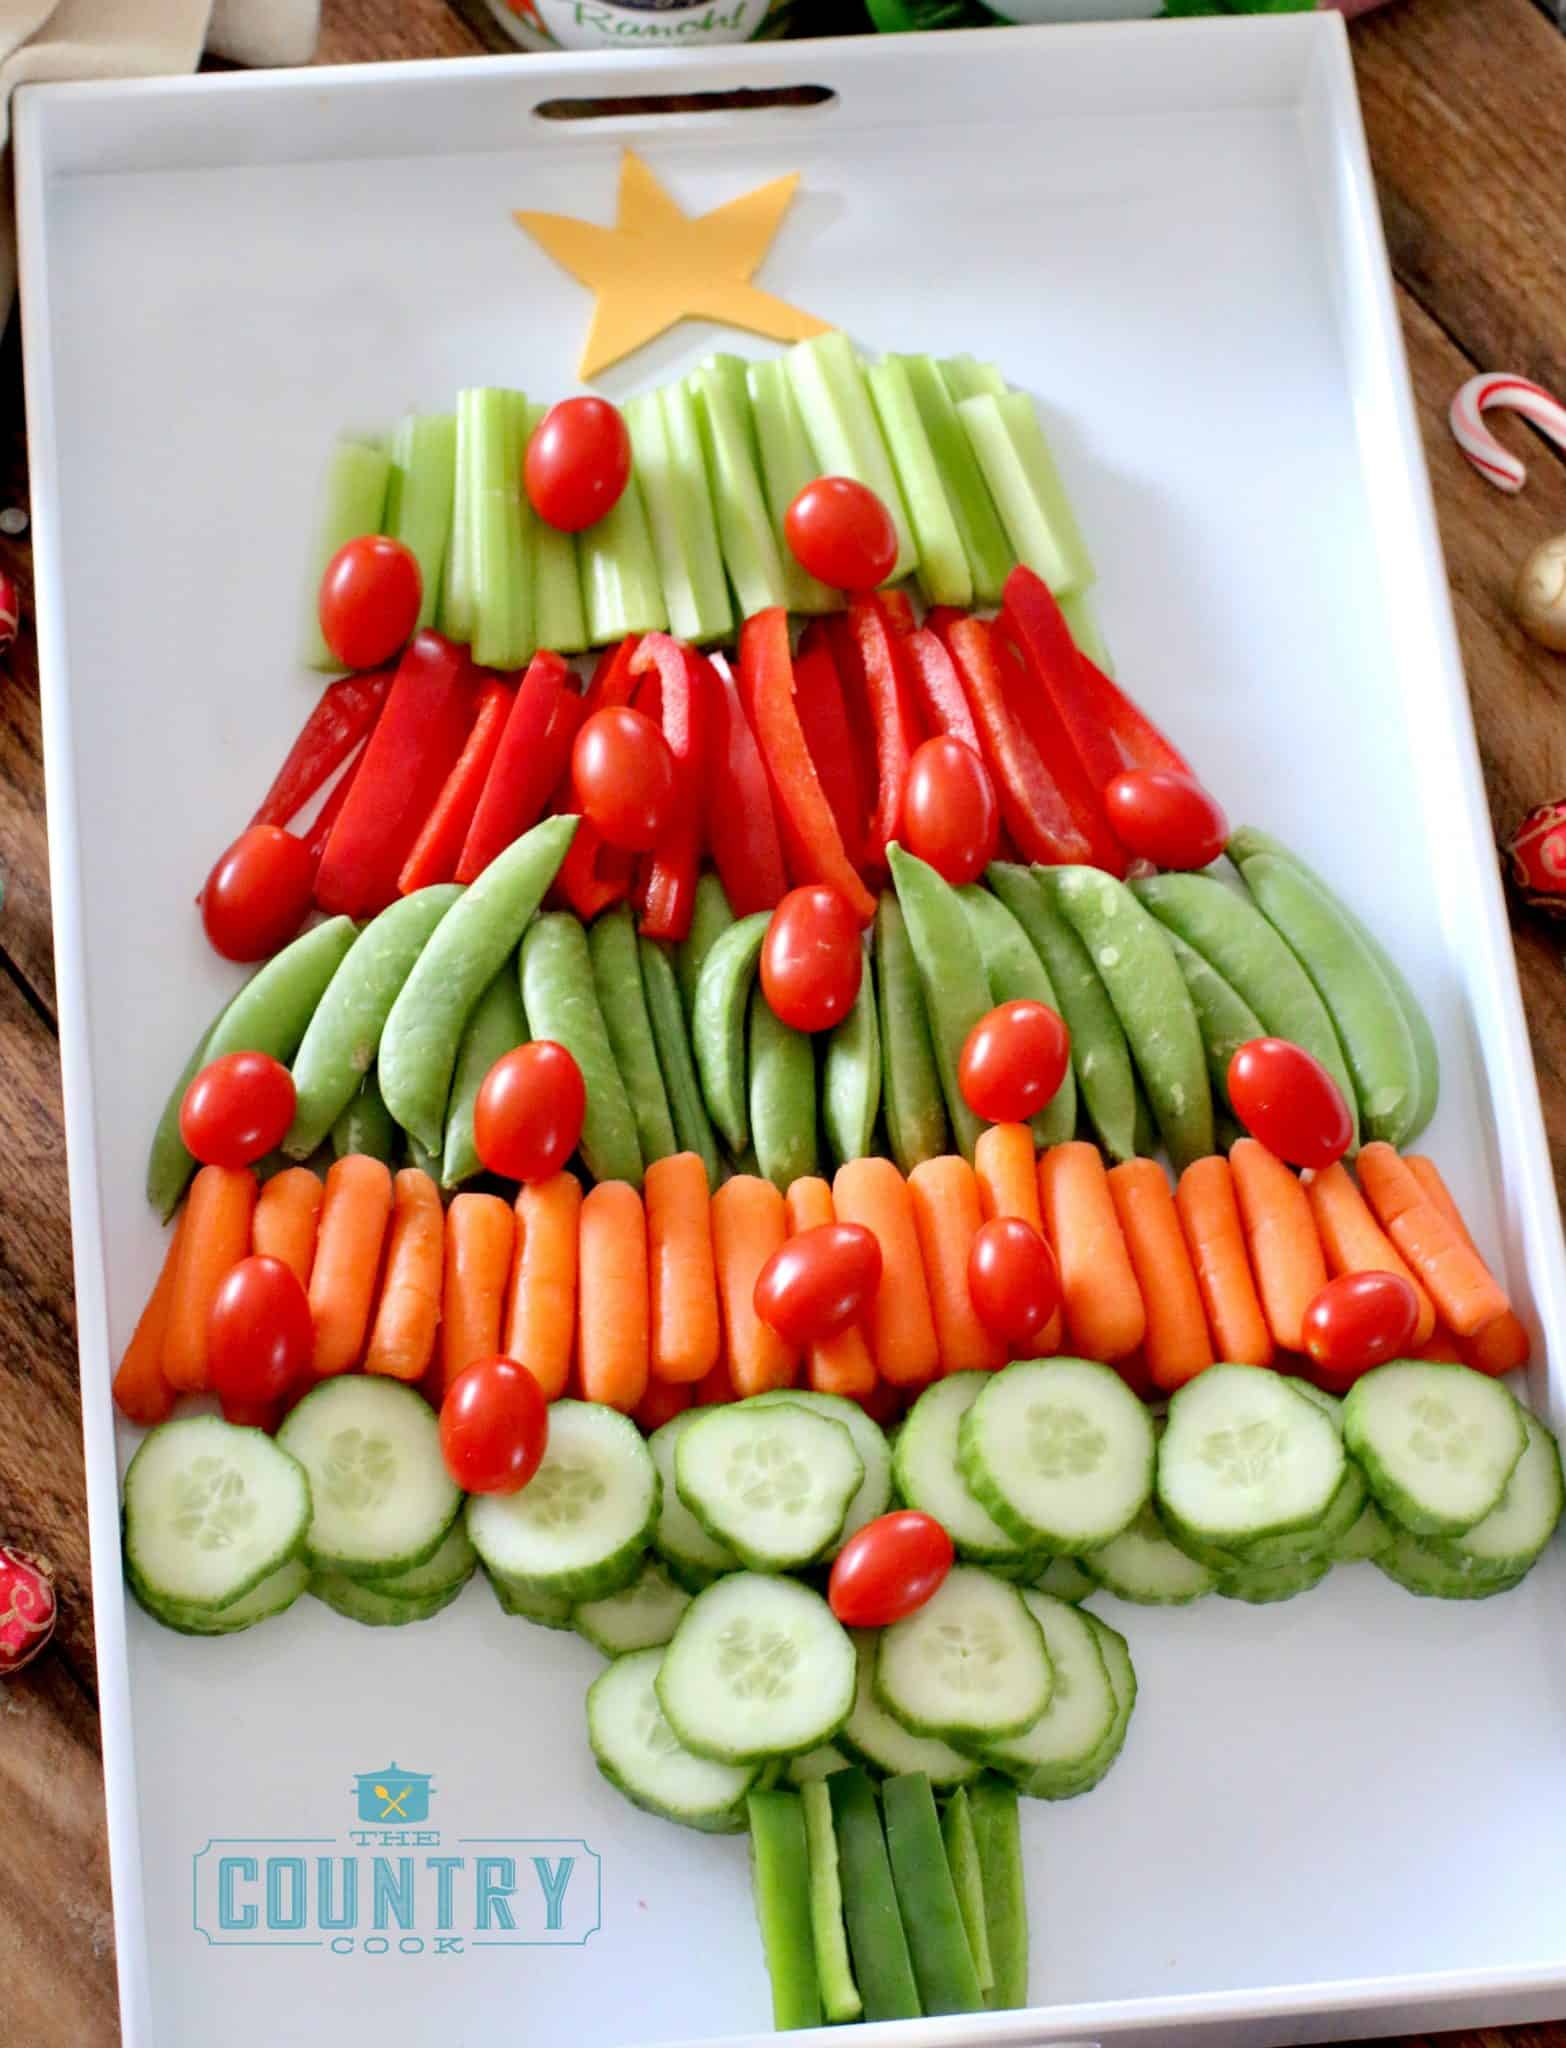 layers of cucumbers, carrots, snap peas, red peppers and celery to make the shape of a Christmas tree on a white tray.